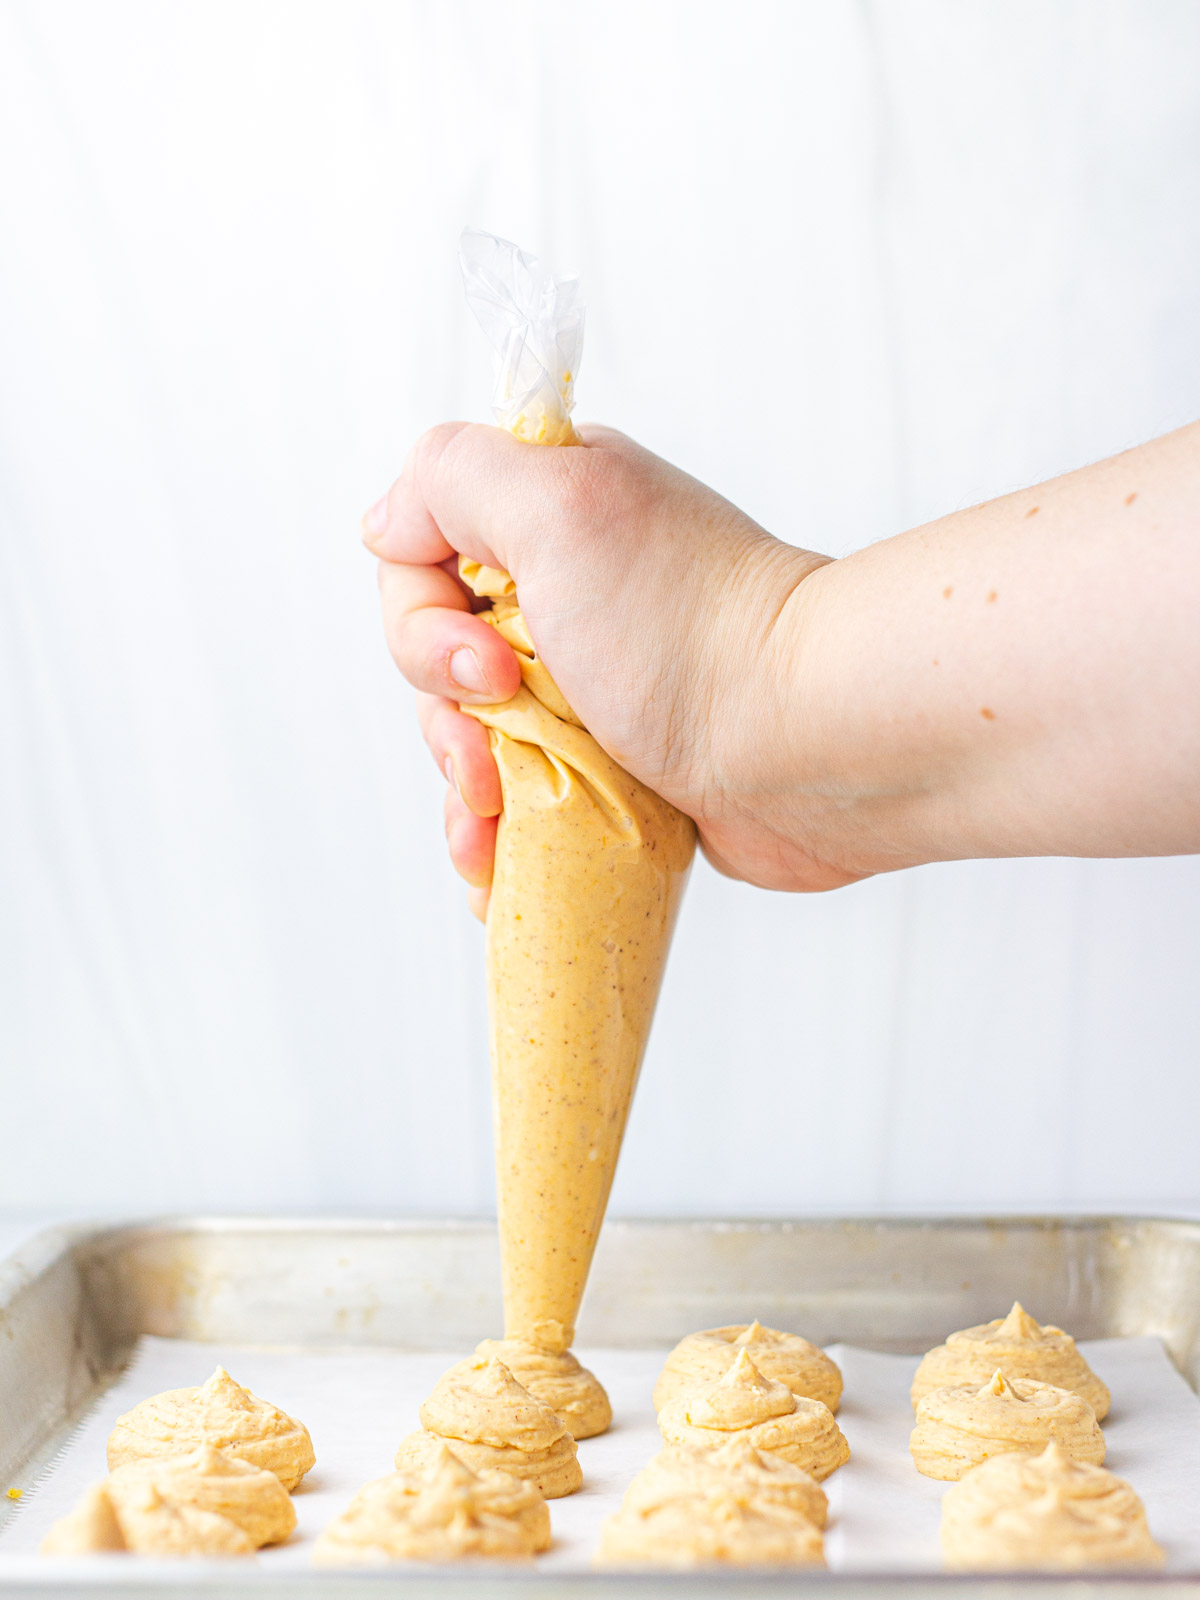 A hand holding a piping bag of pumpkin cheesecake filling piping dollops of filling onto a parchment lined baking sheet.